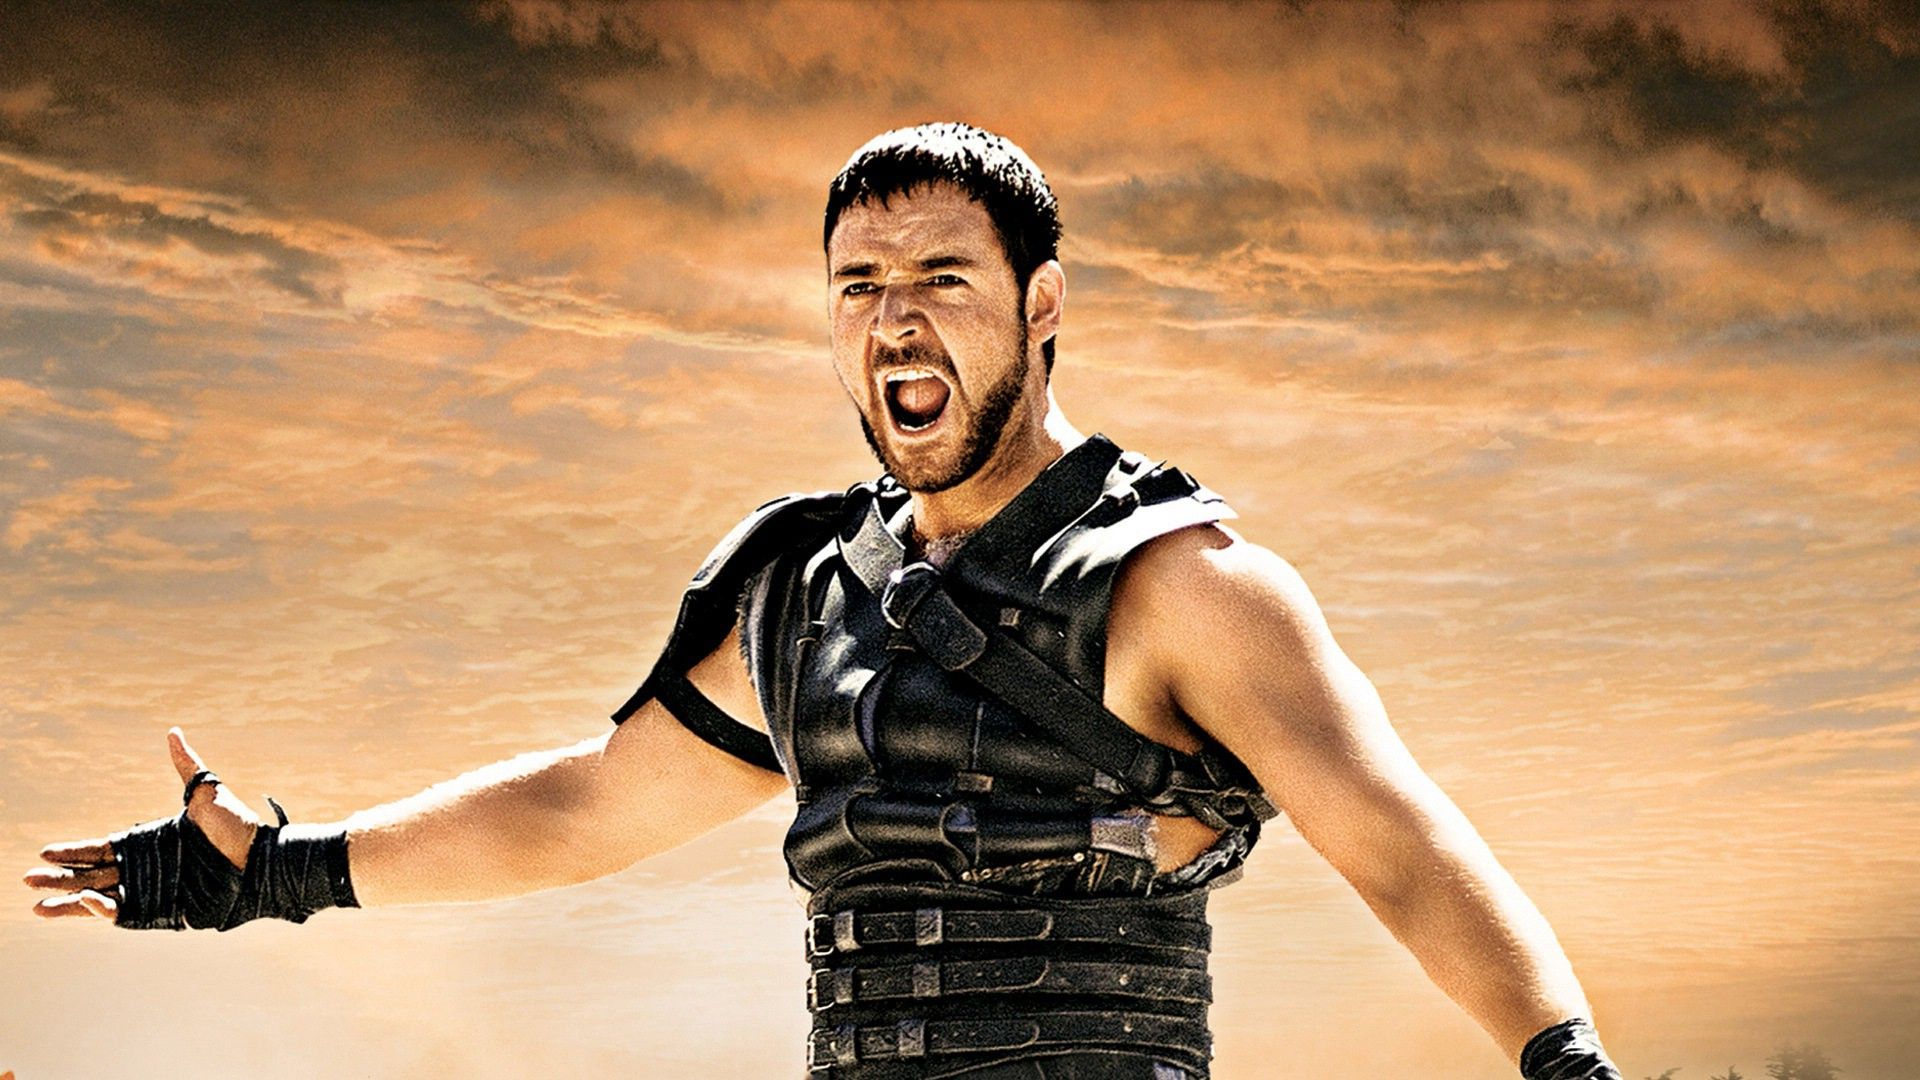 Free download Without a doubt Gladiator is one of Ridley Scotts best and one of [1920x1080] for your Desktop, Mobile & Tablet. Explore Gladiator Movie Wallpaper. Roman Gladiator Wallpaper